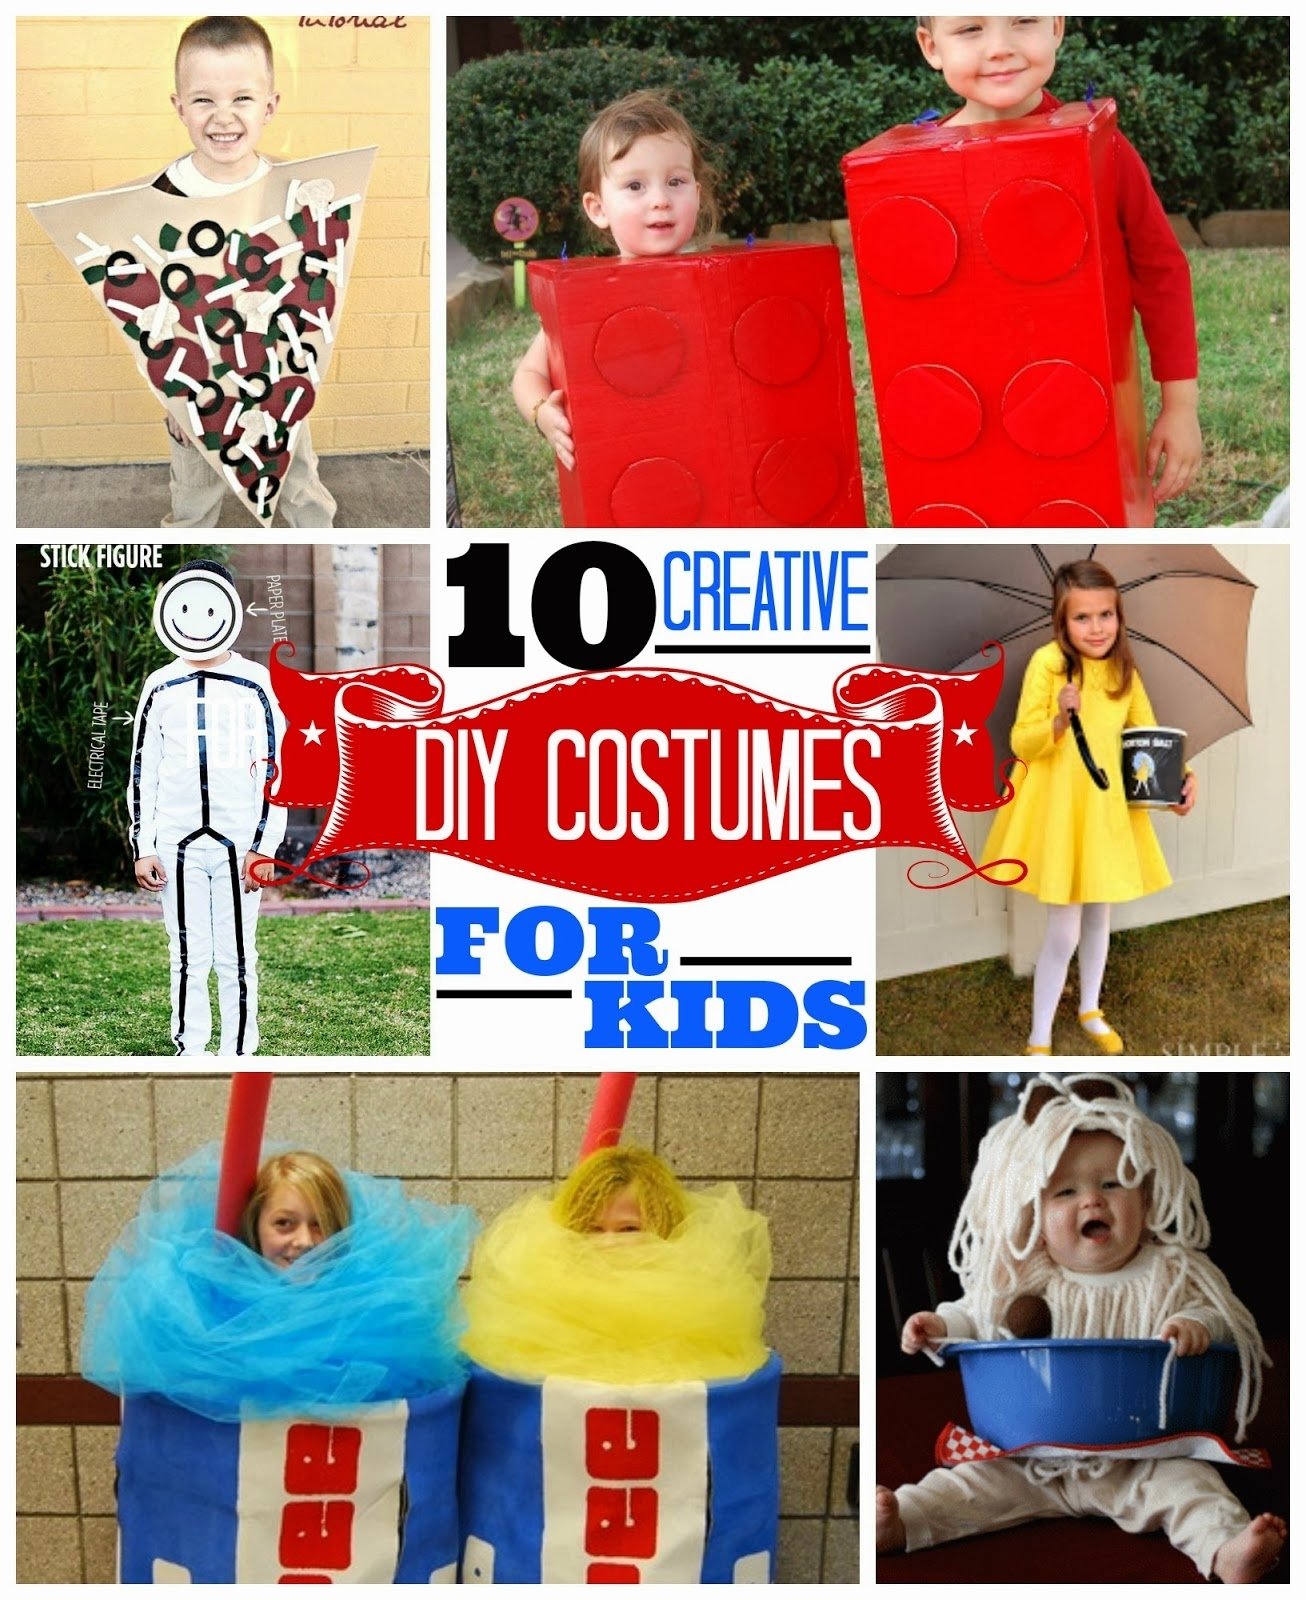 10 Most Recommended Homemade Costume Ideas For Kids eatsleepmake 10 creative diy costumes for kids 2022